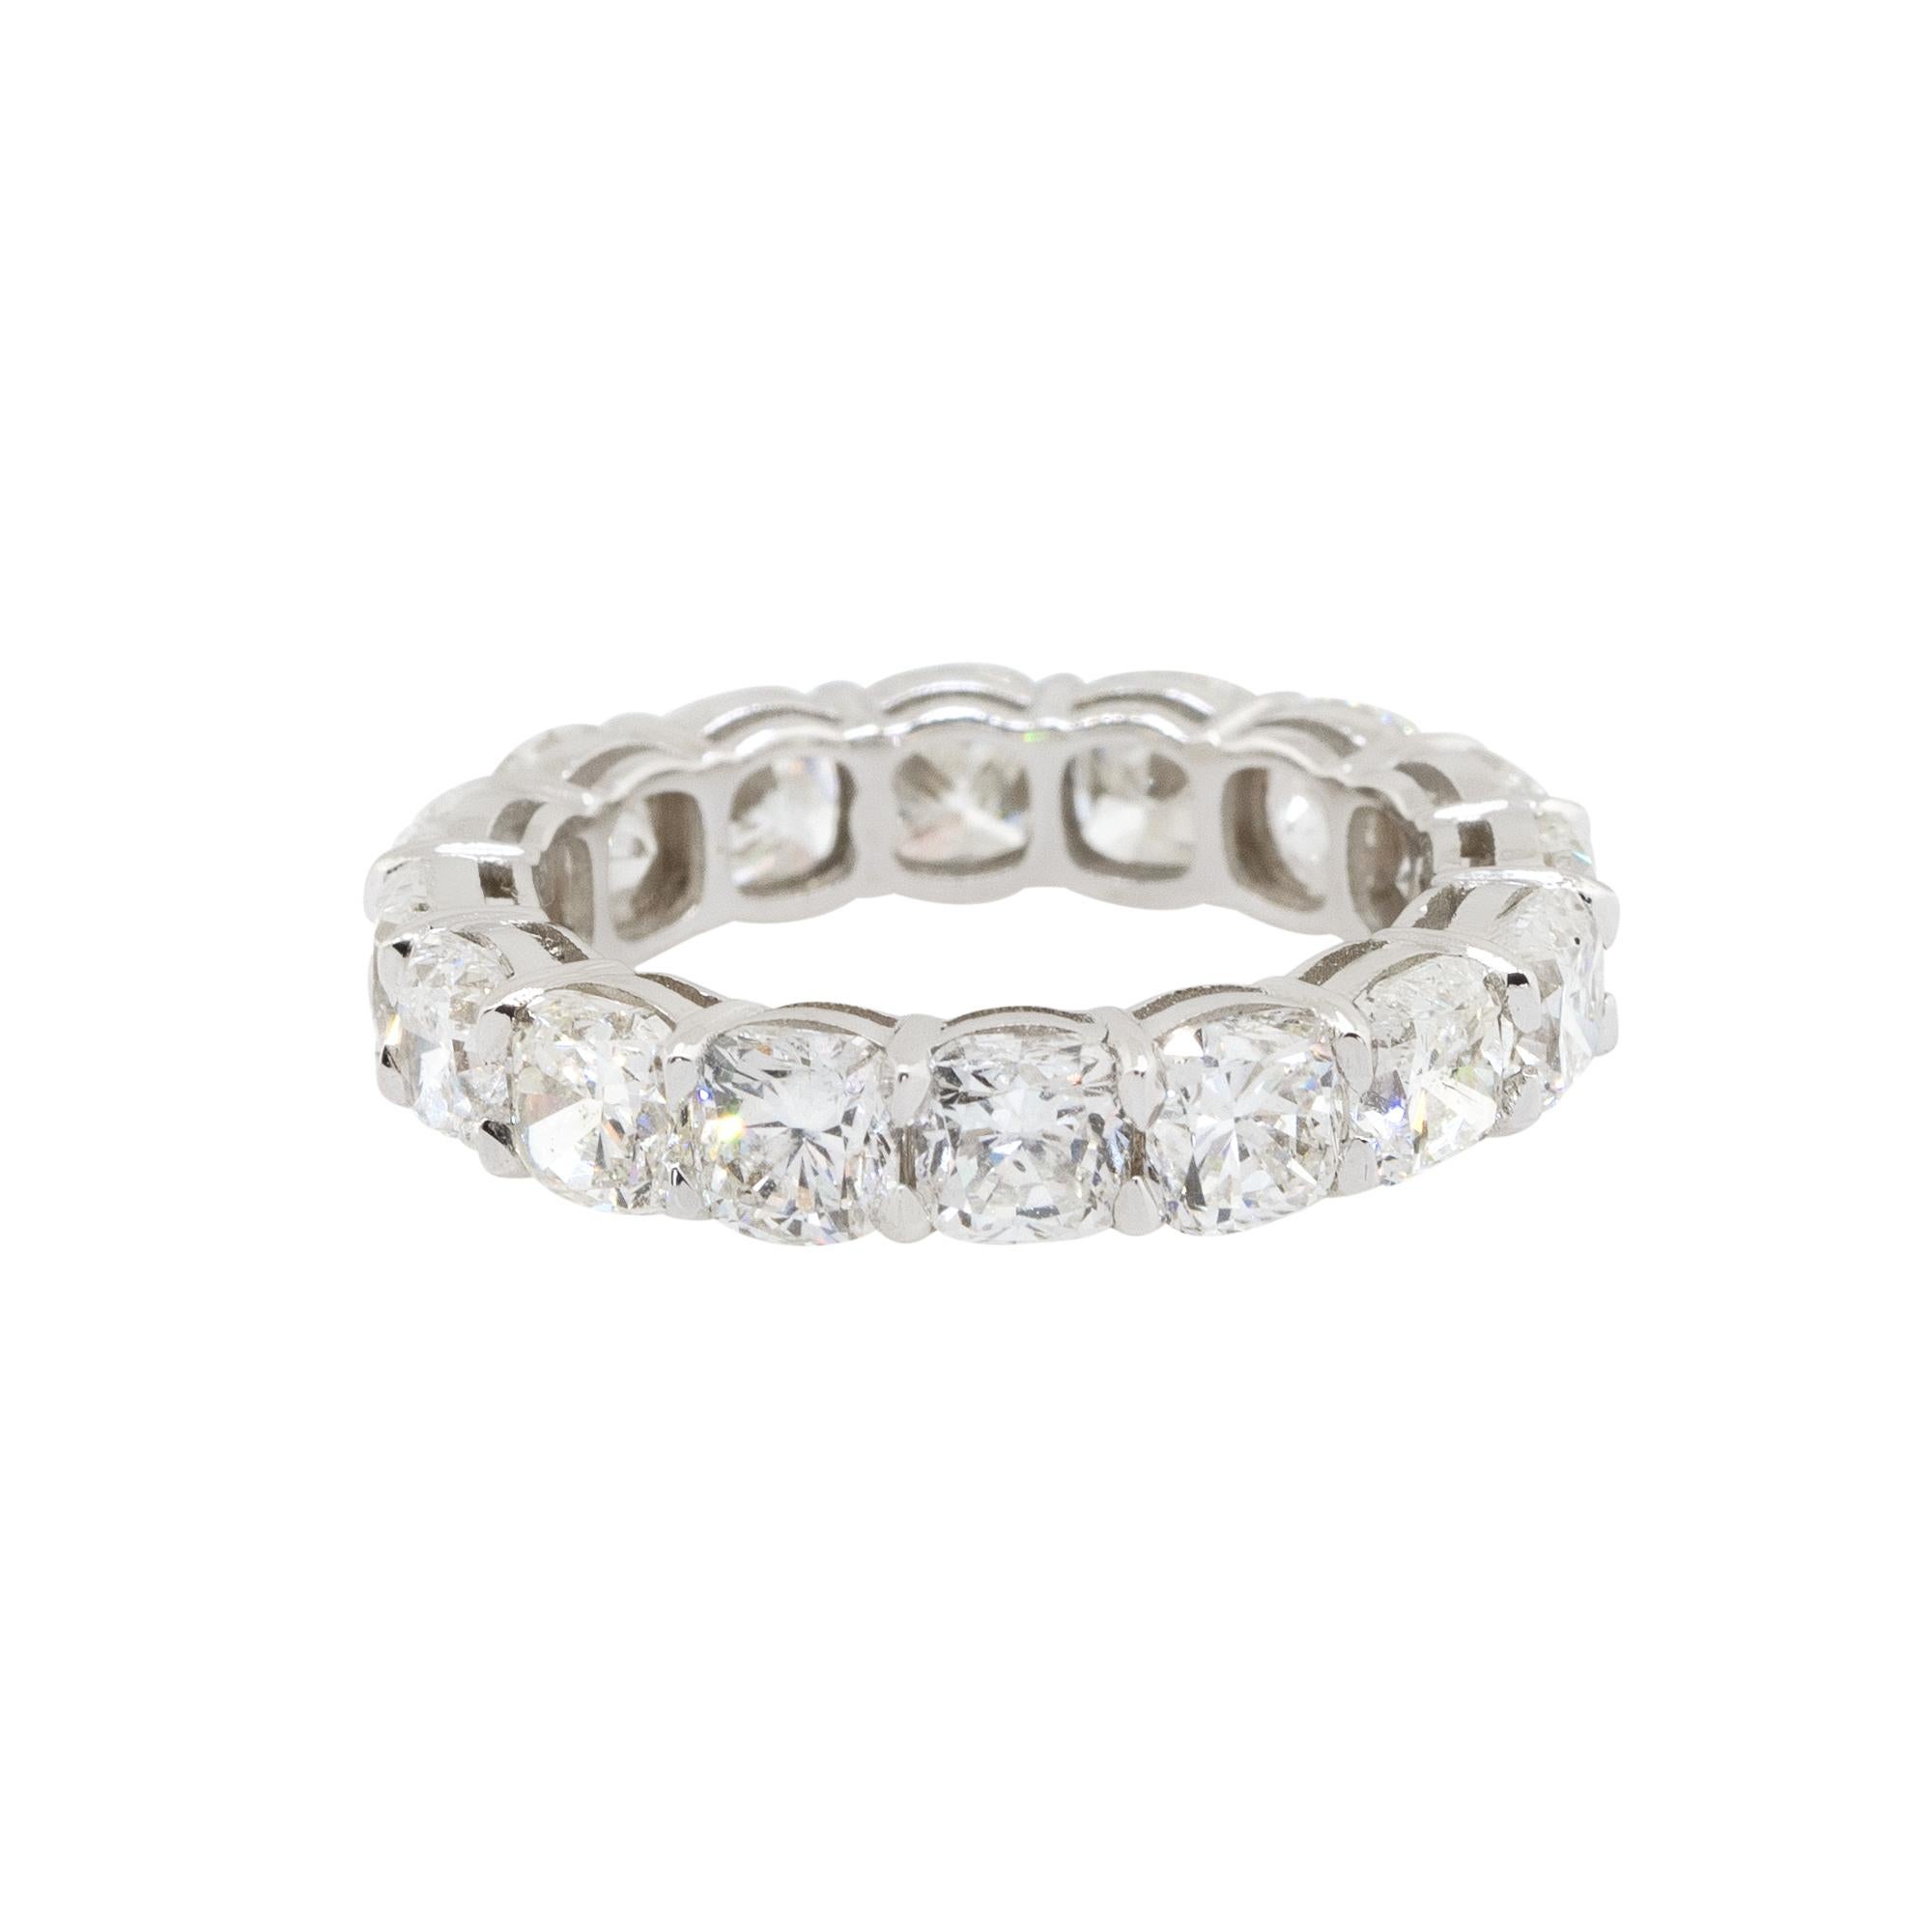 6.71 Carat Cushion Cut Diamond Eternity Band 18 Karat In Stock In Excellent Condition For Sale In Boca Raton, FL